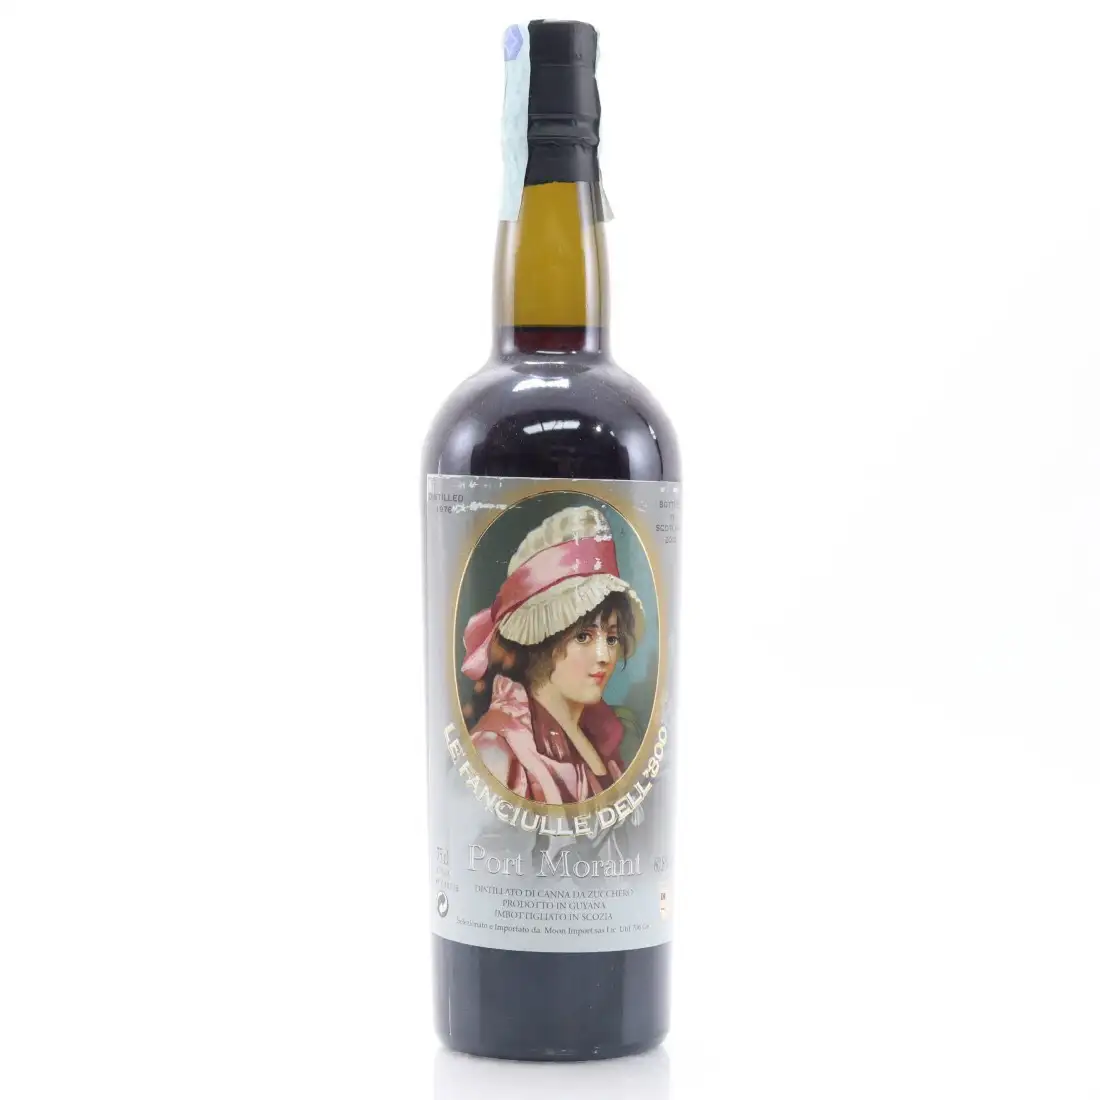 Image of the front of the bottle of the rum Fanciulle dell’800